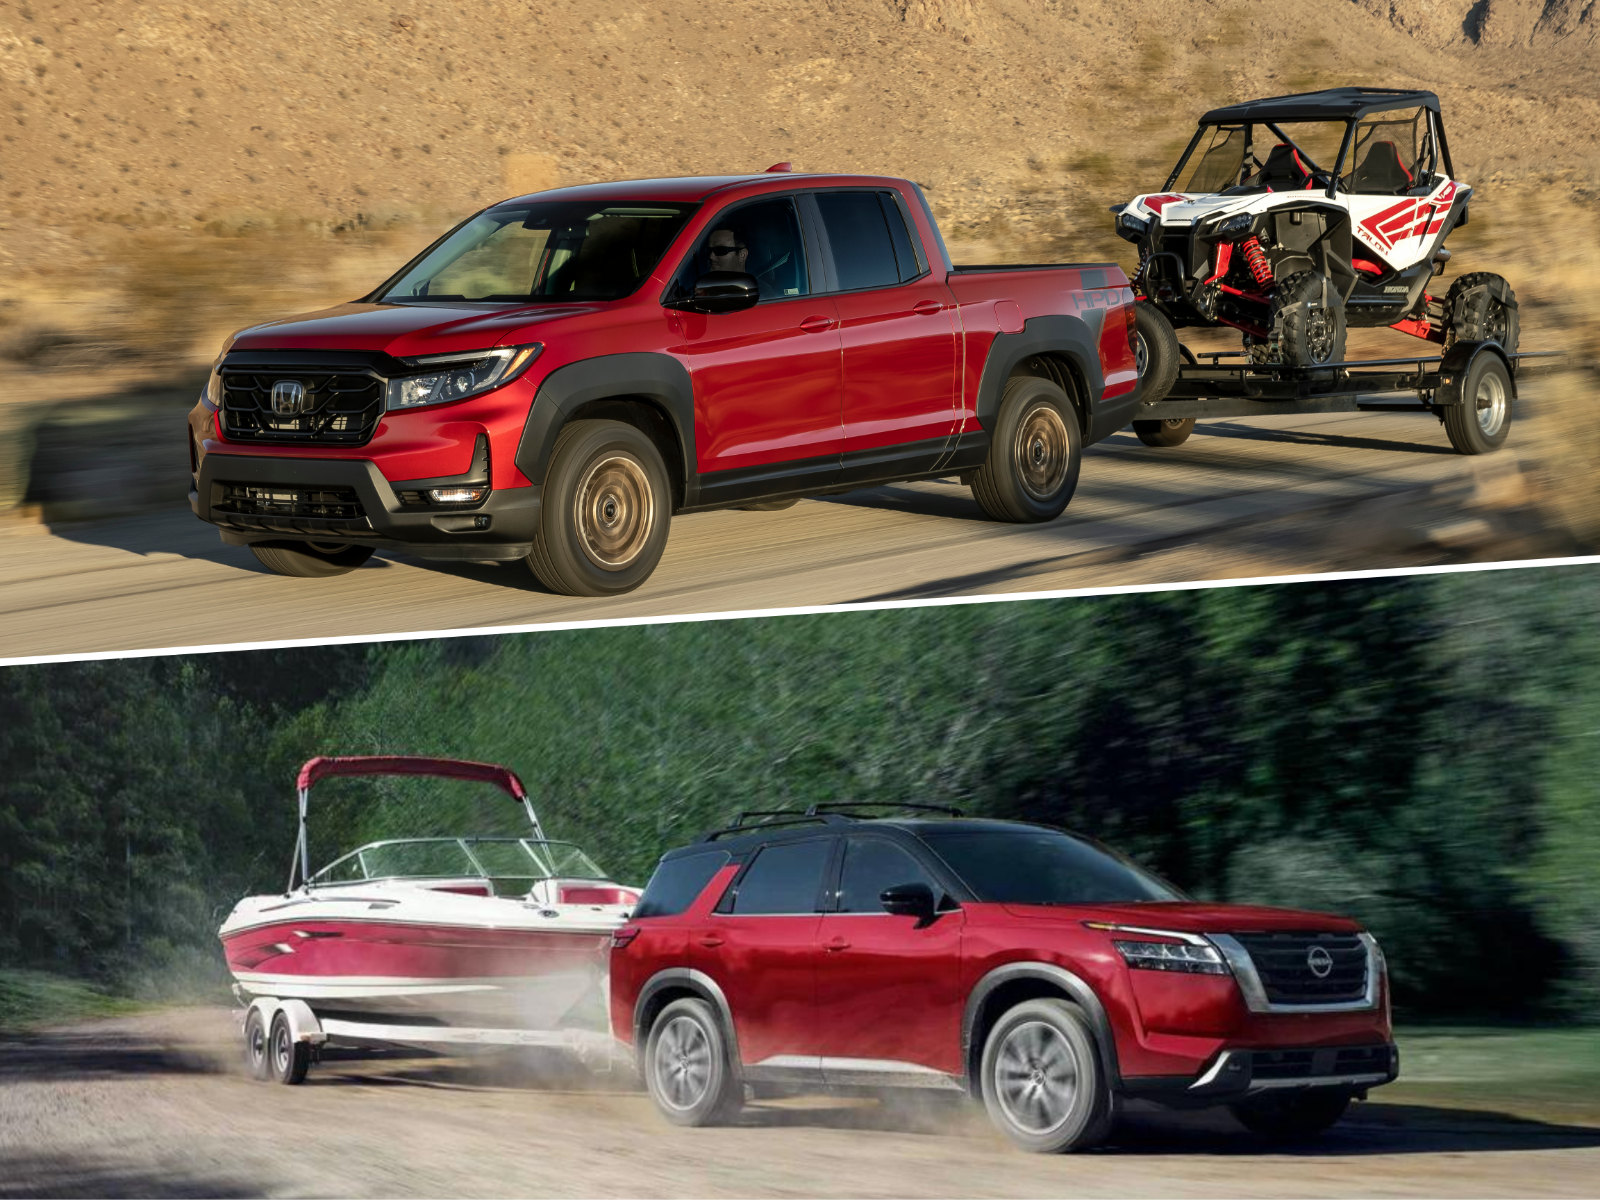 Best In Tow: Which Centennial Auto Group Vehicles Tow The Line?